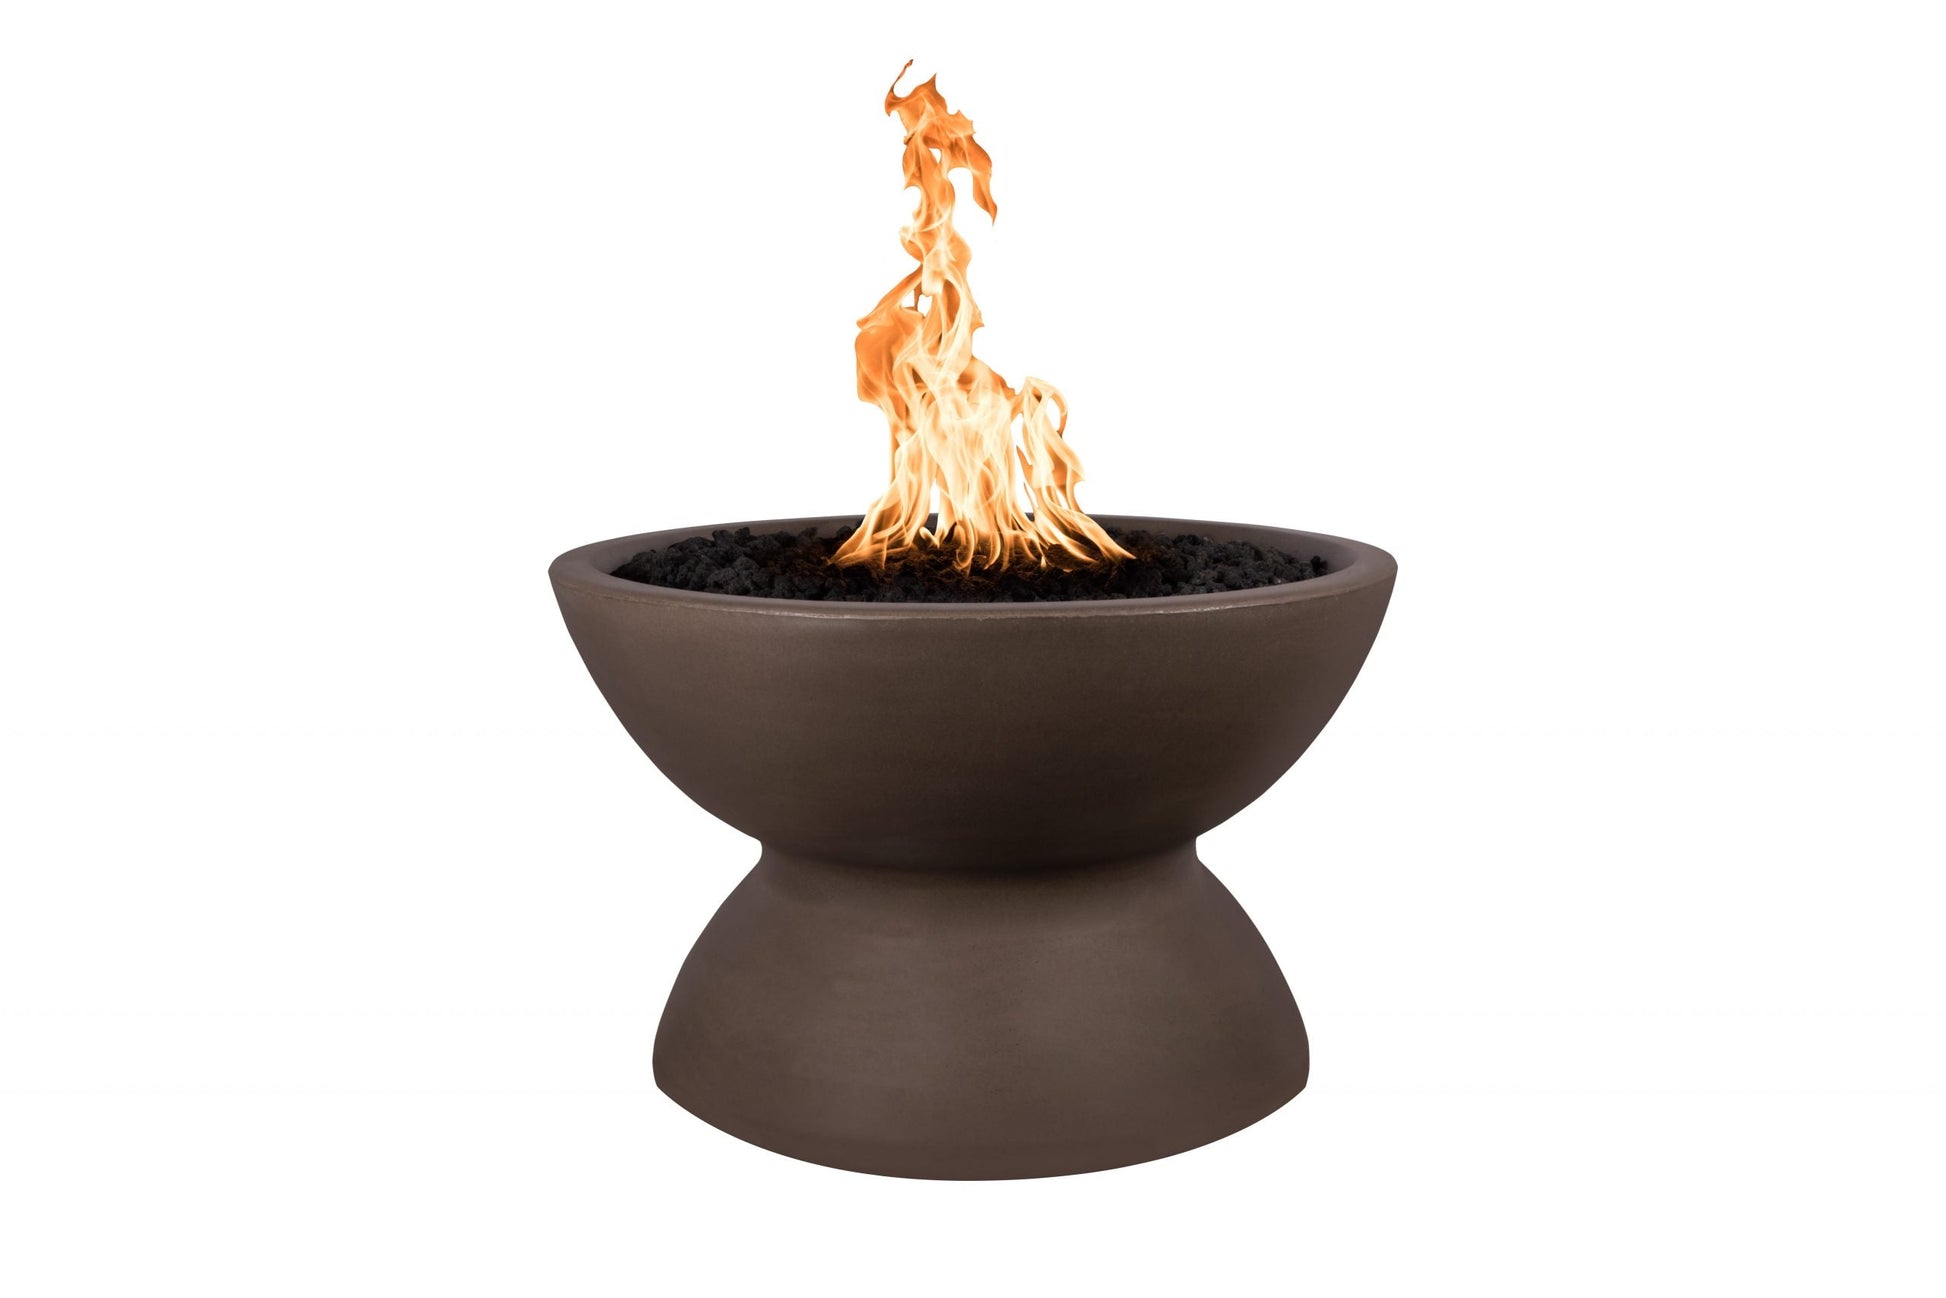 The Outdoor Plus Round Copa 33" Ash GFRC Concrete Liquid Propane Fire Pit with 12V Electronic Ignition